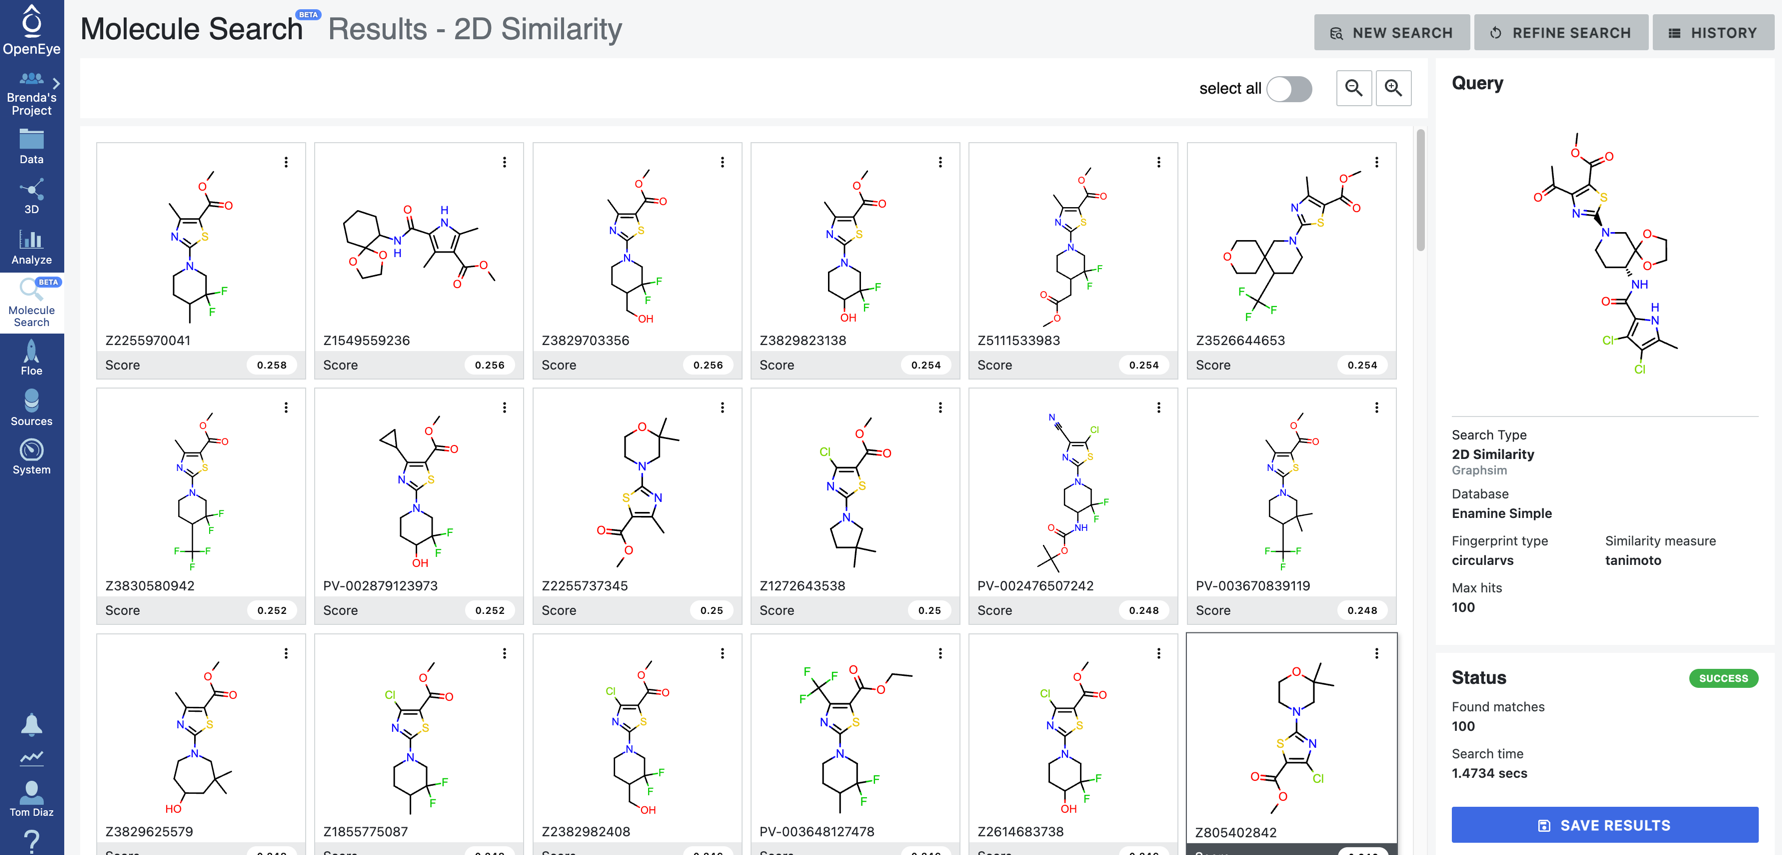 _images/mol_search_enamine_simple_results.png